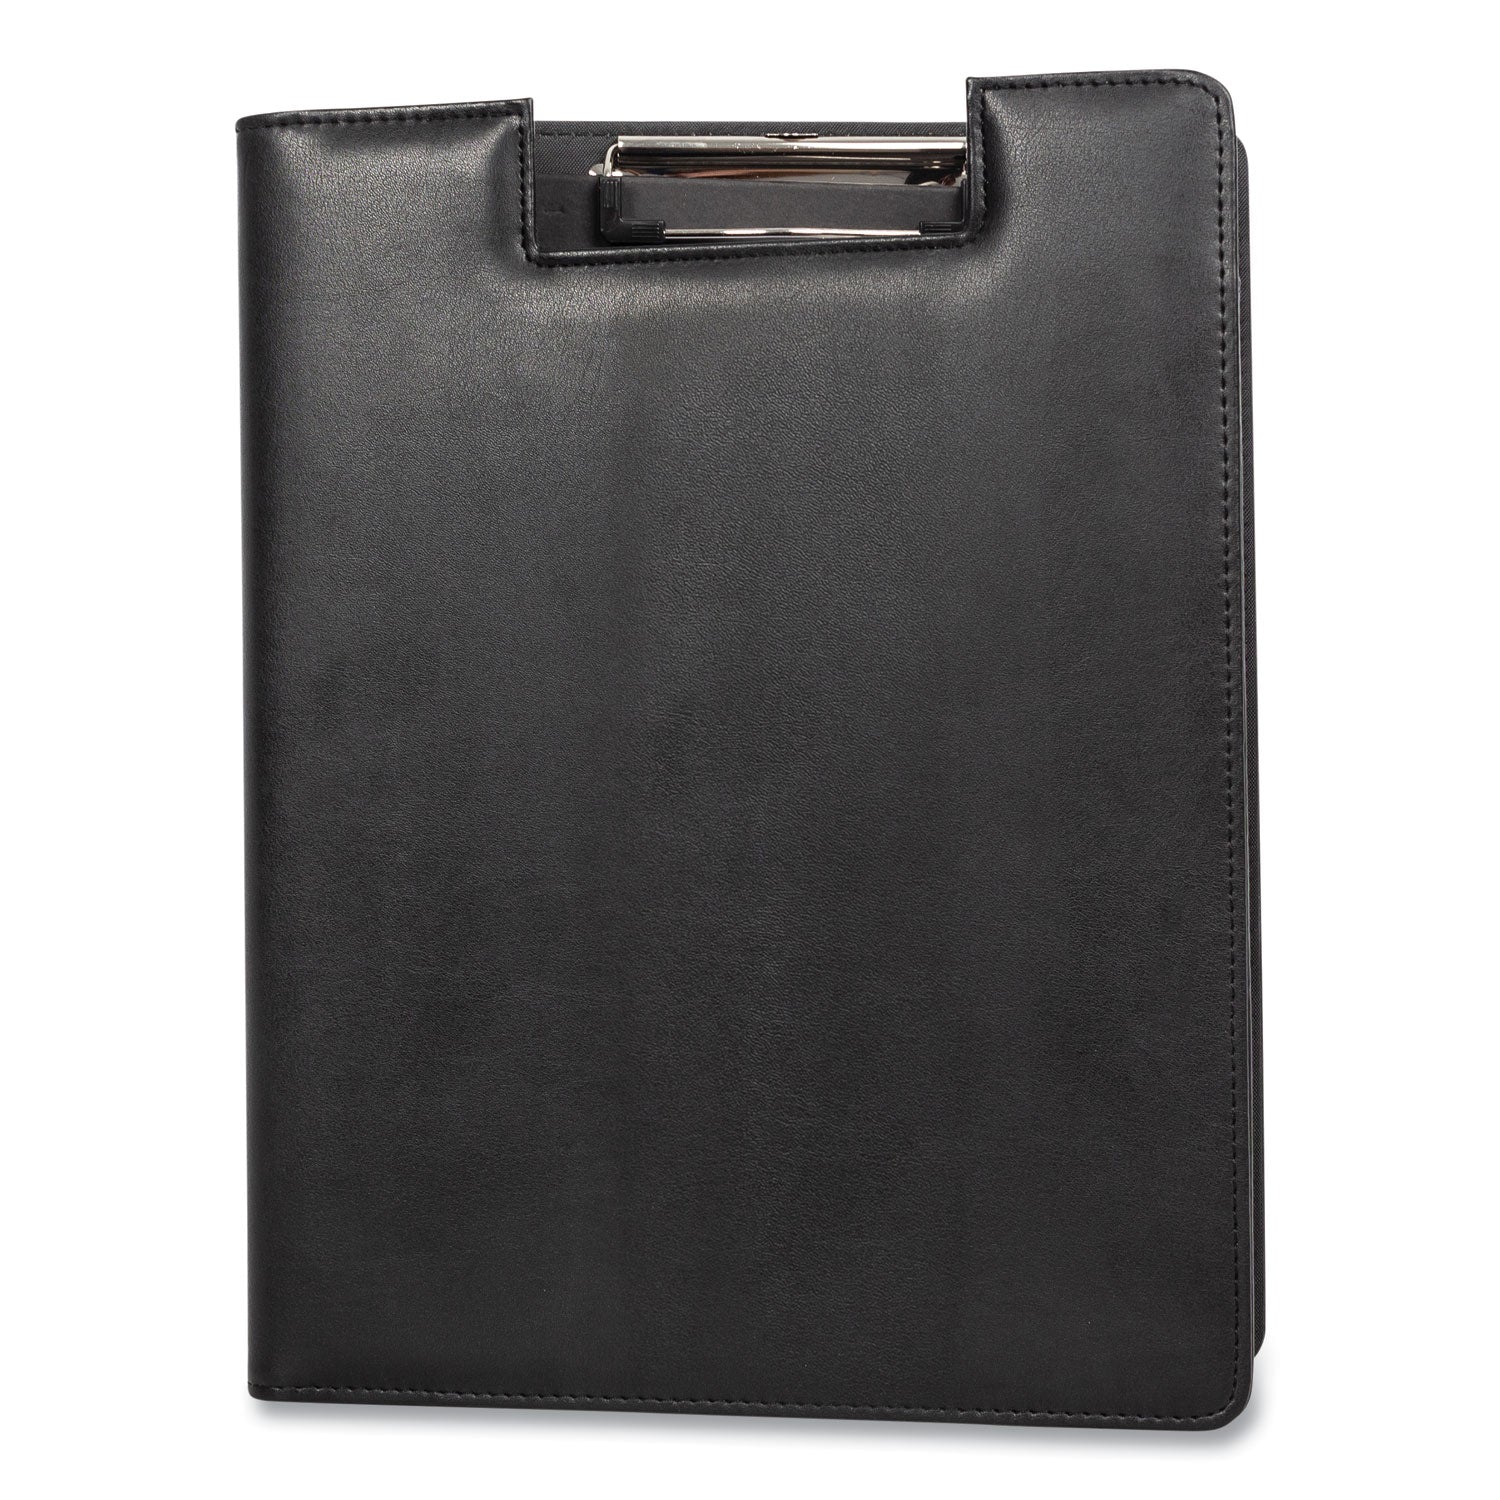 faux-leather-padfolio-notched-front-cover-with-clipboard-fastener-9-x-12-pad-975-x-125-black_bnd5041bsblack - 1